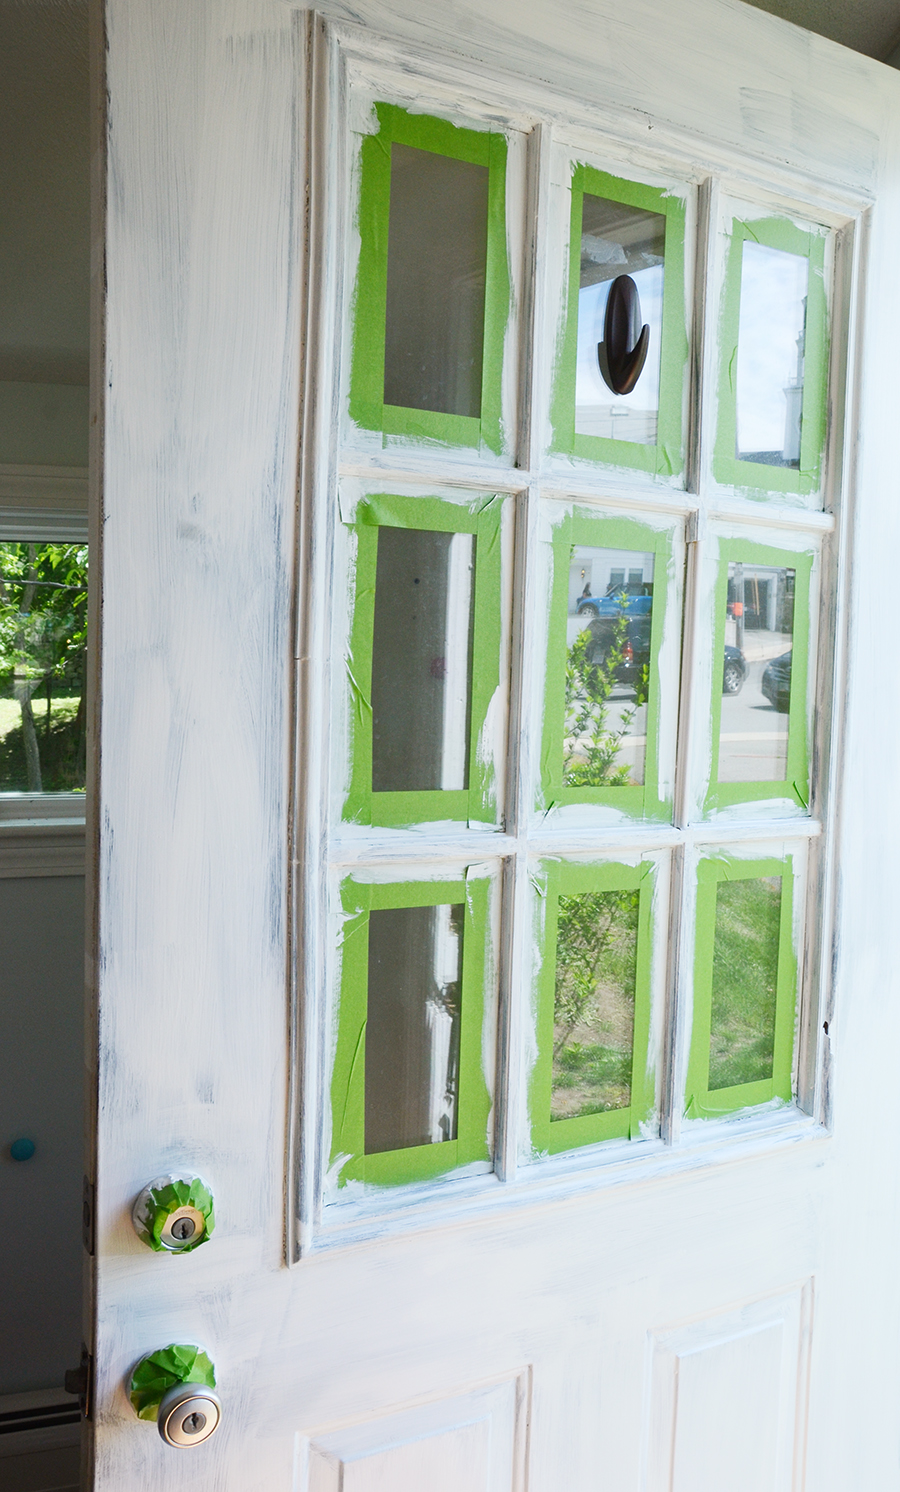 How to paint an exterior door after white primer